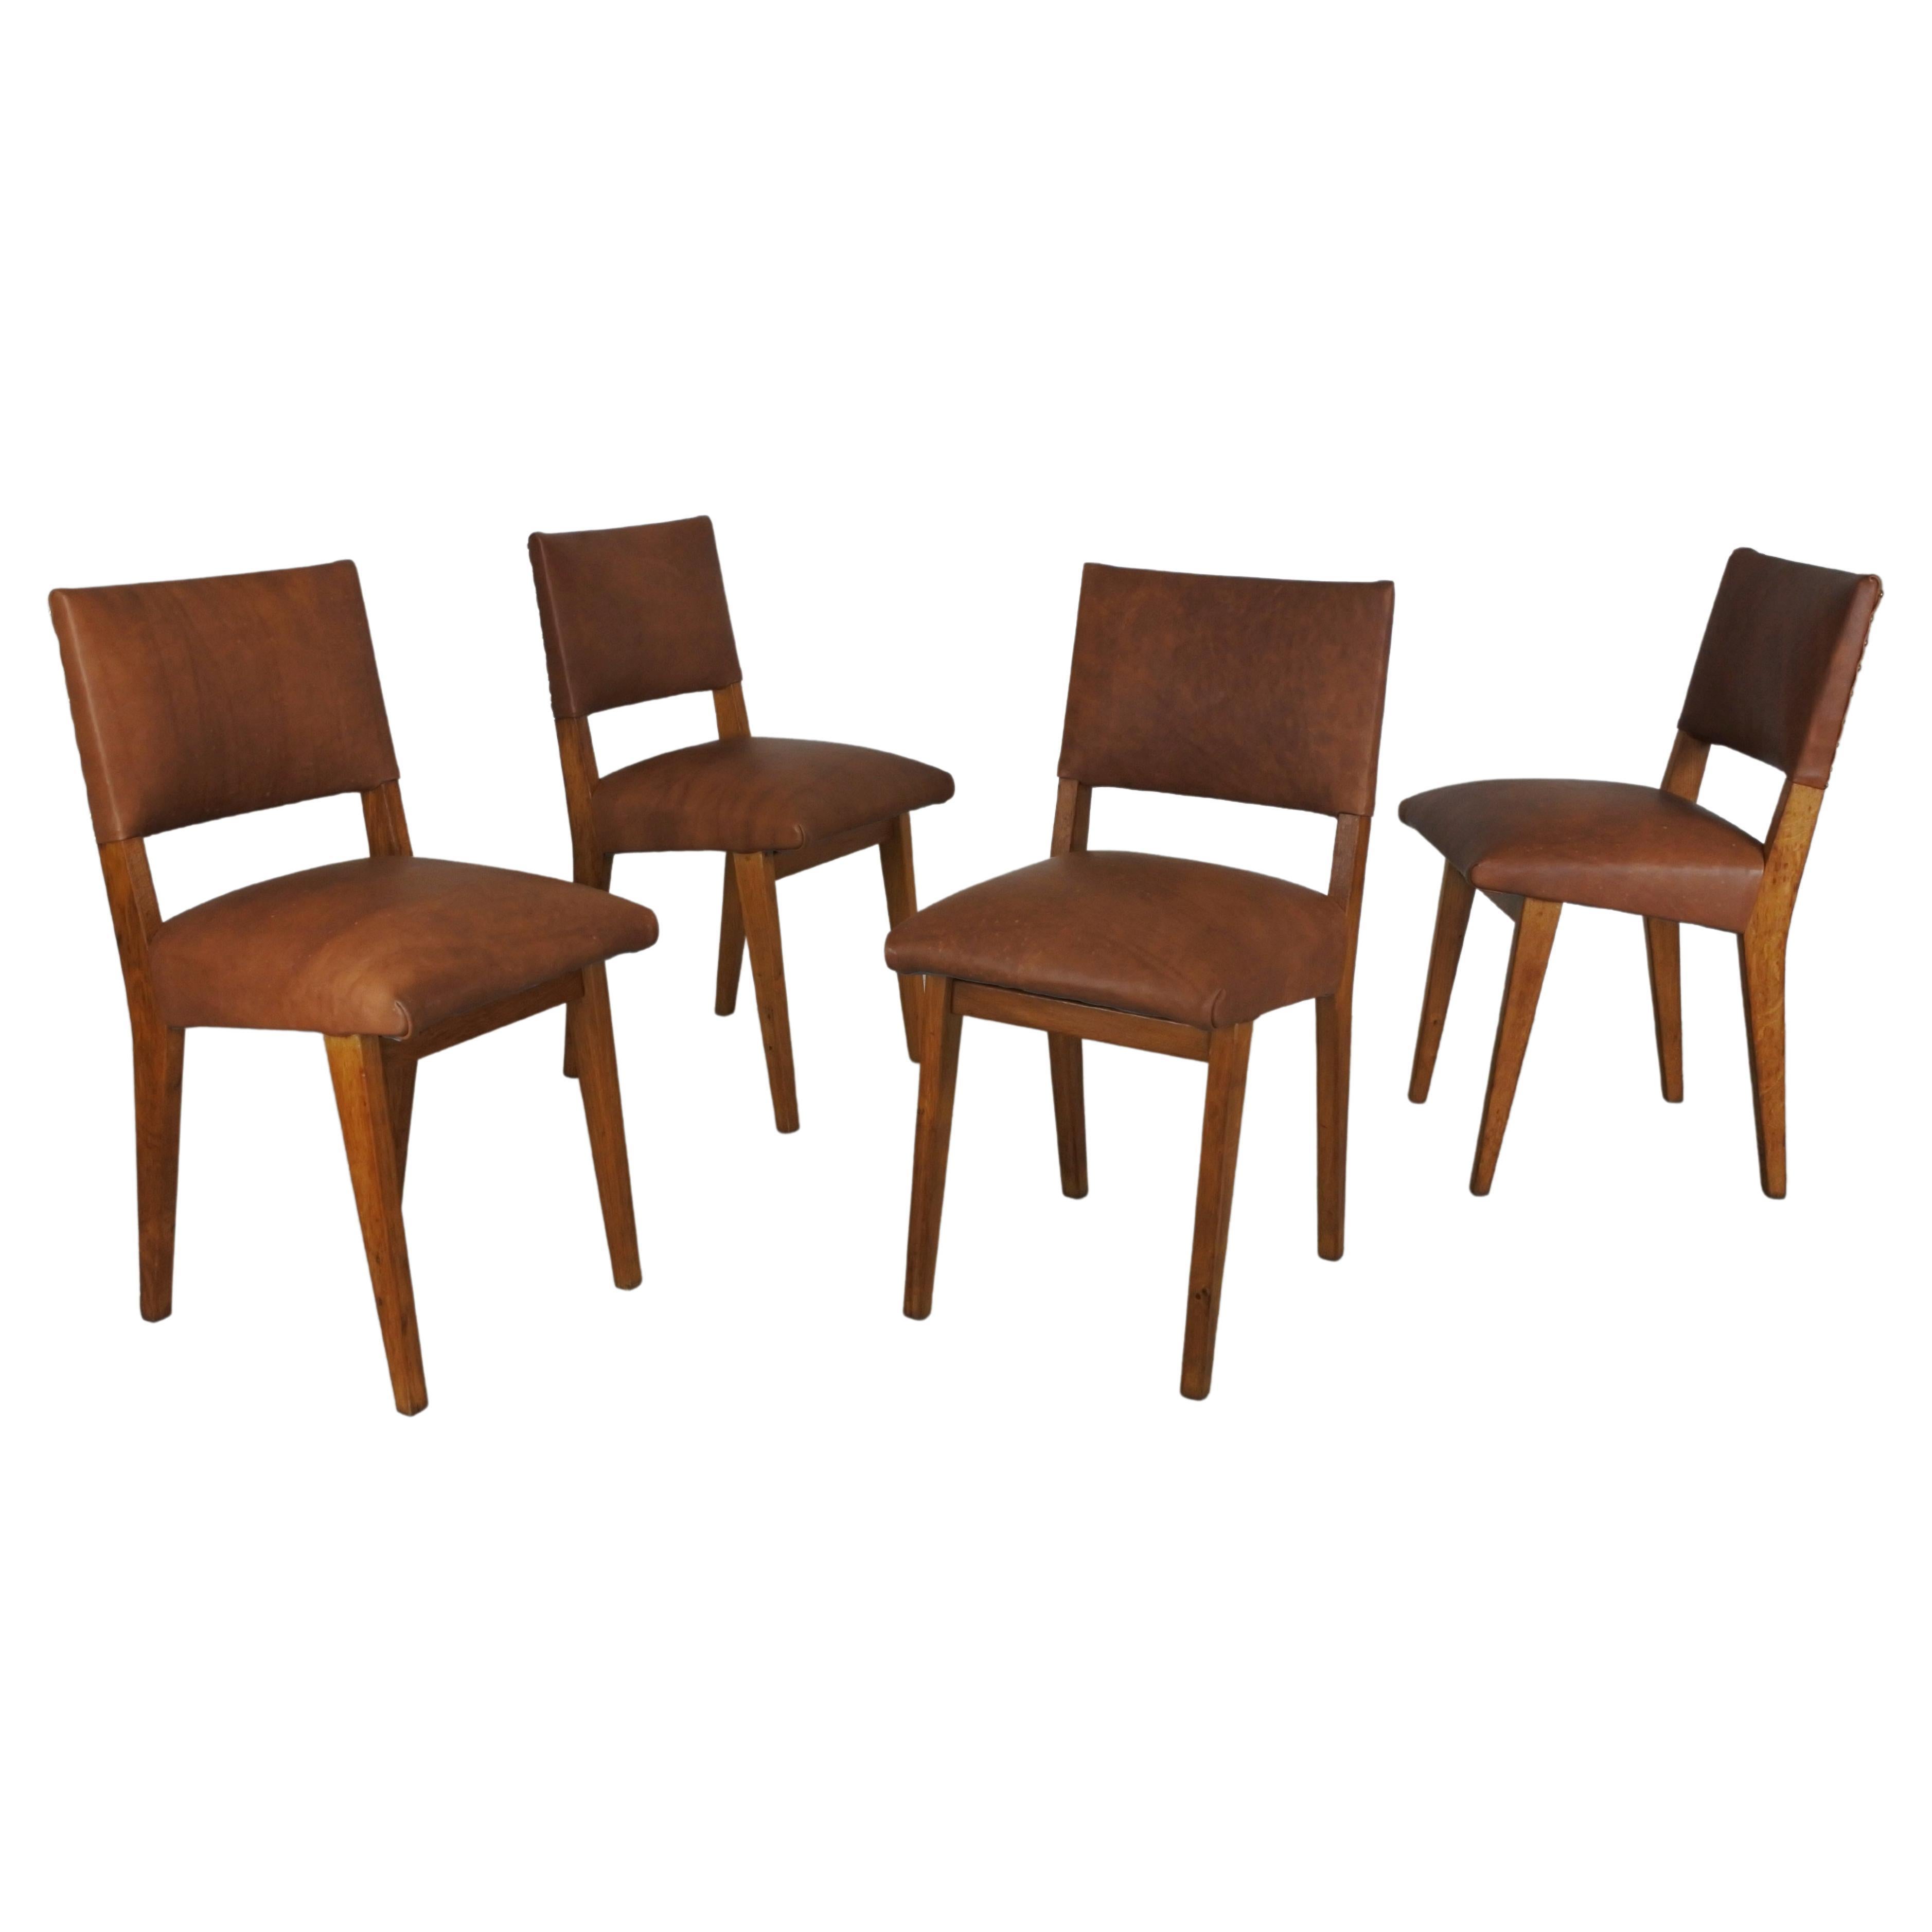 Set of Four Dining Chairs, Oak Wood & Leather, Attributed to Jens Risom & Knoll